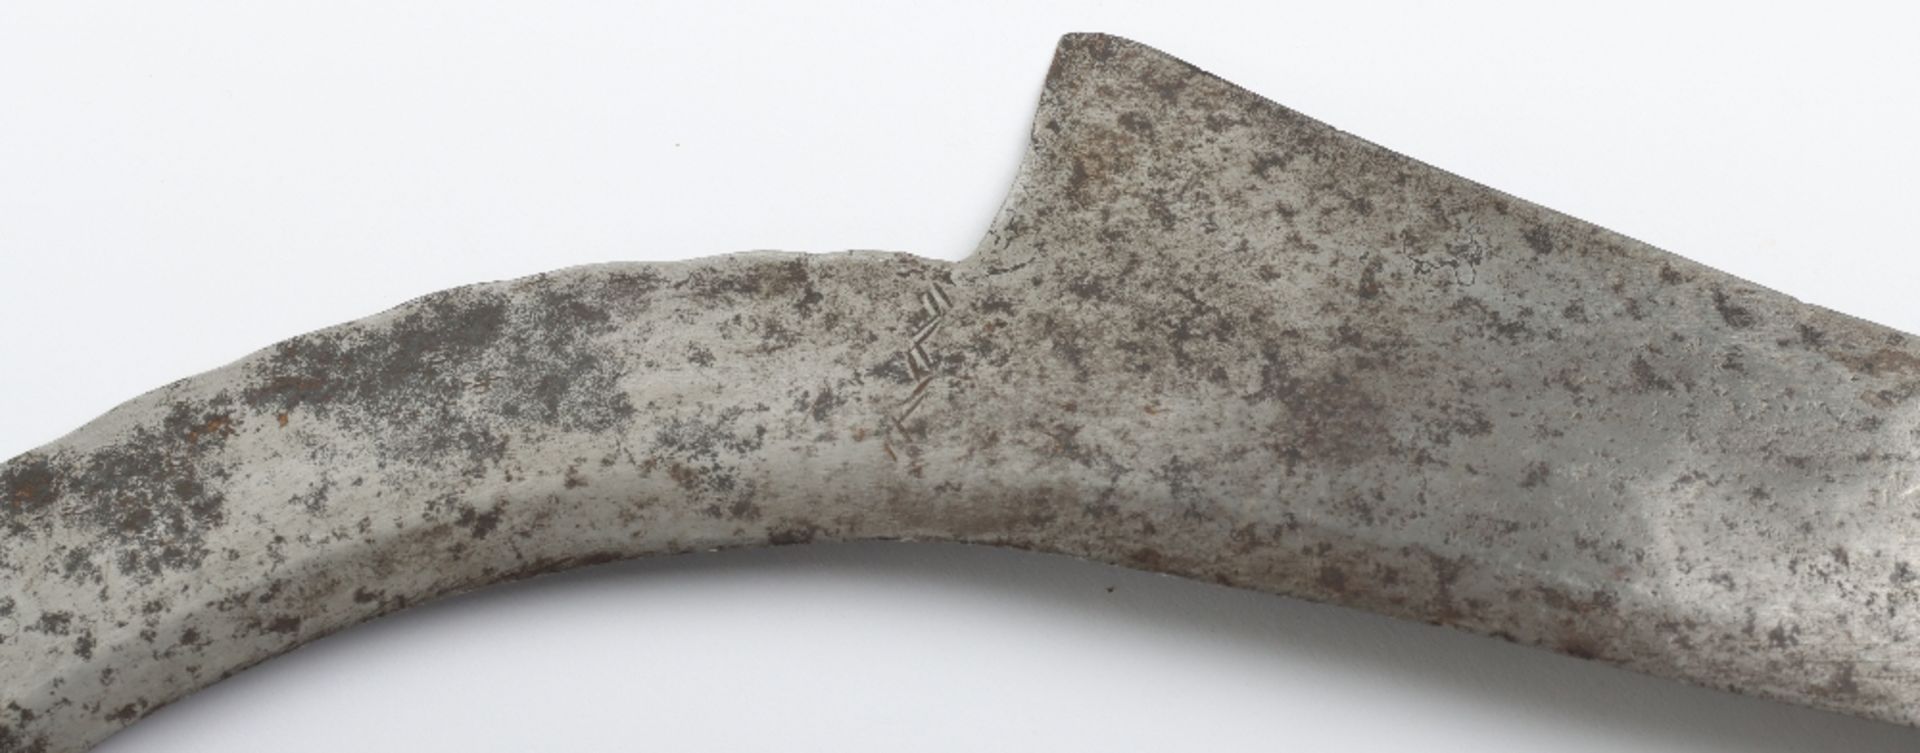 Large Curved Banza Throwing Knife Used by the Azande of Southern Sudan - Bild 9 aus 9